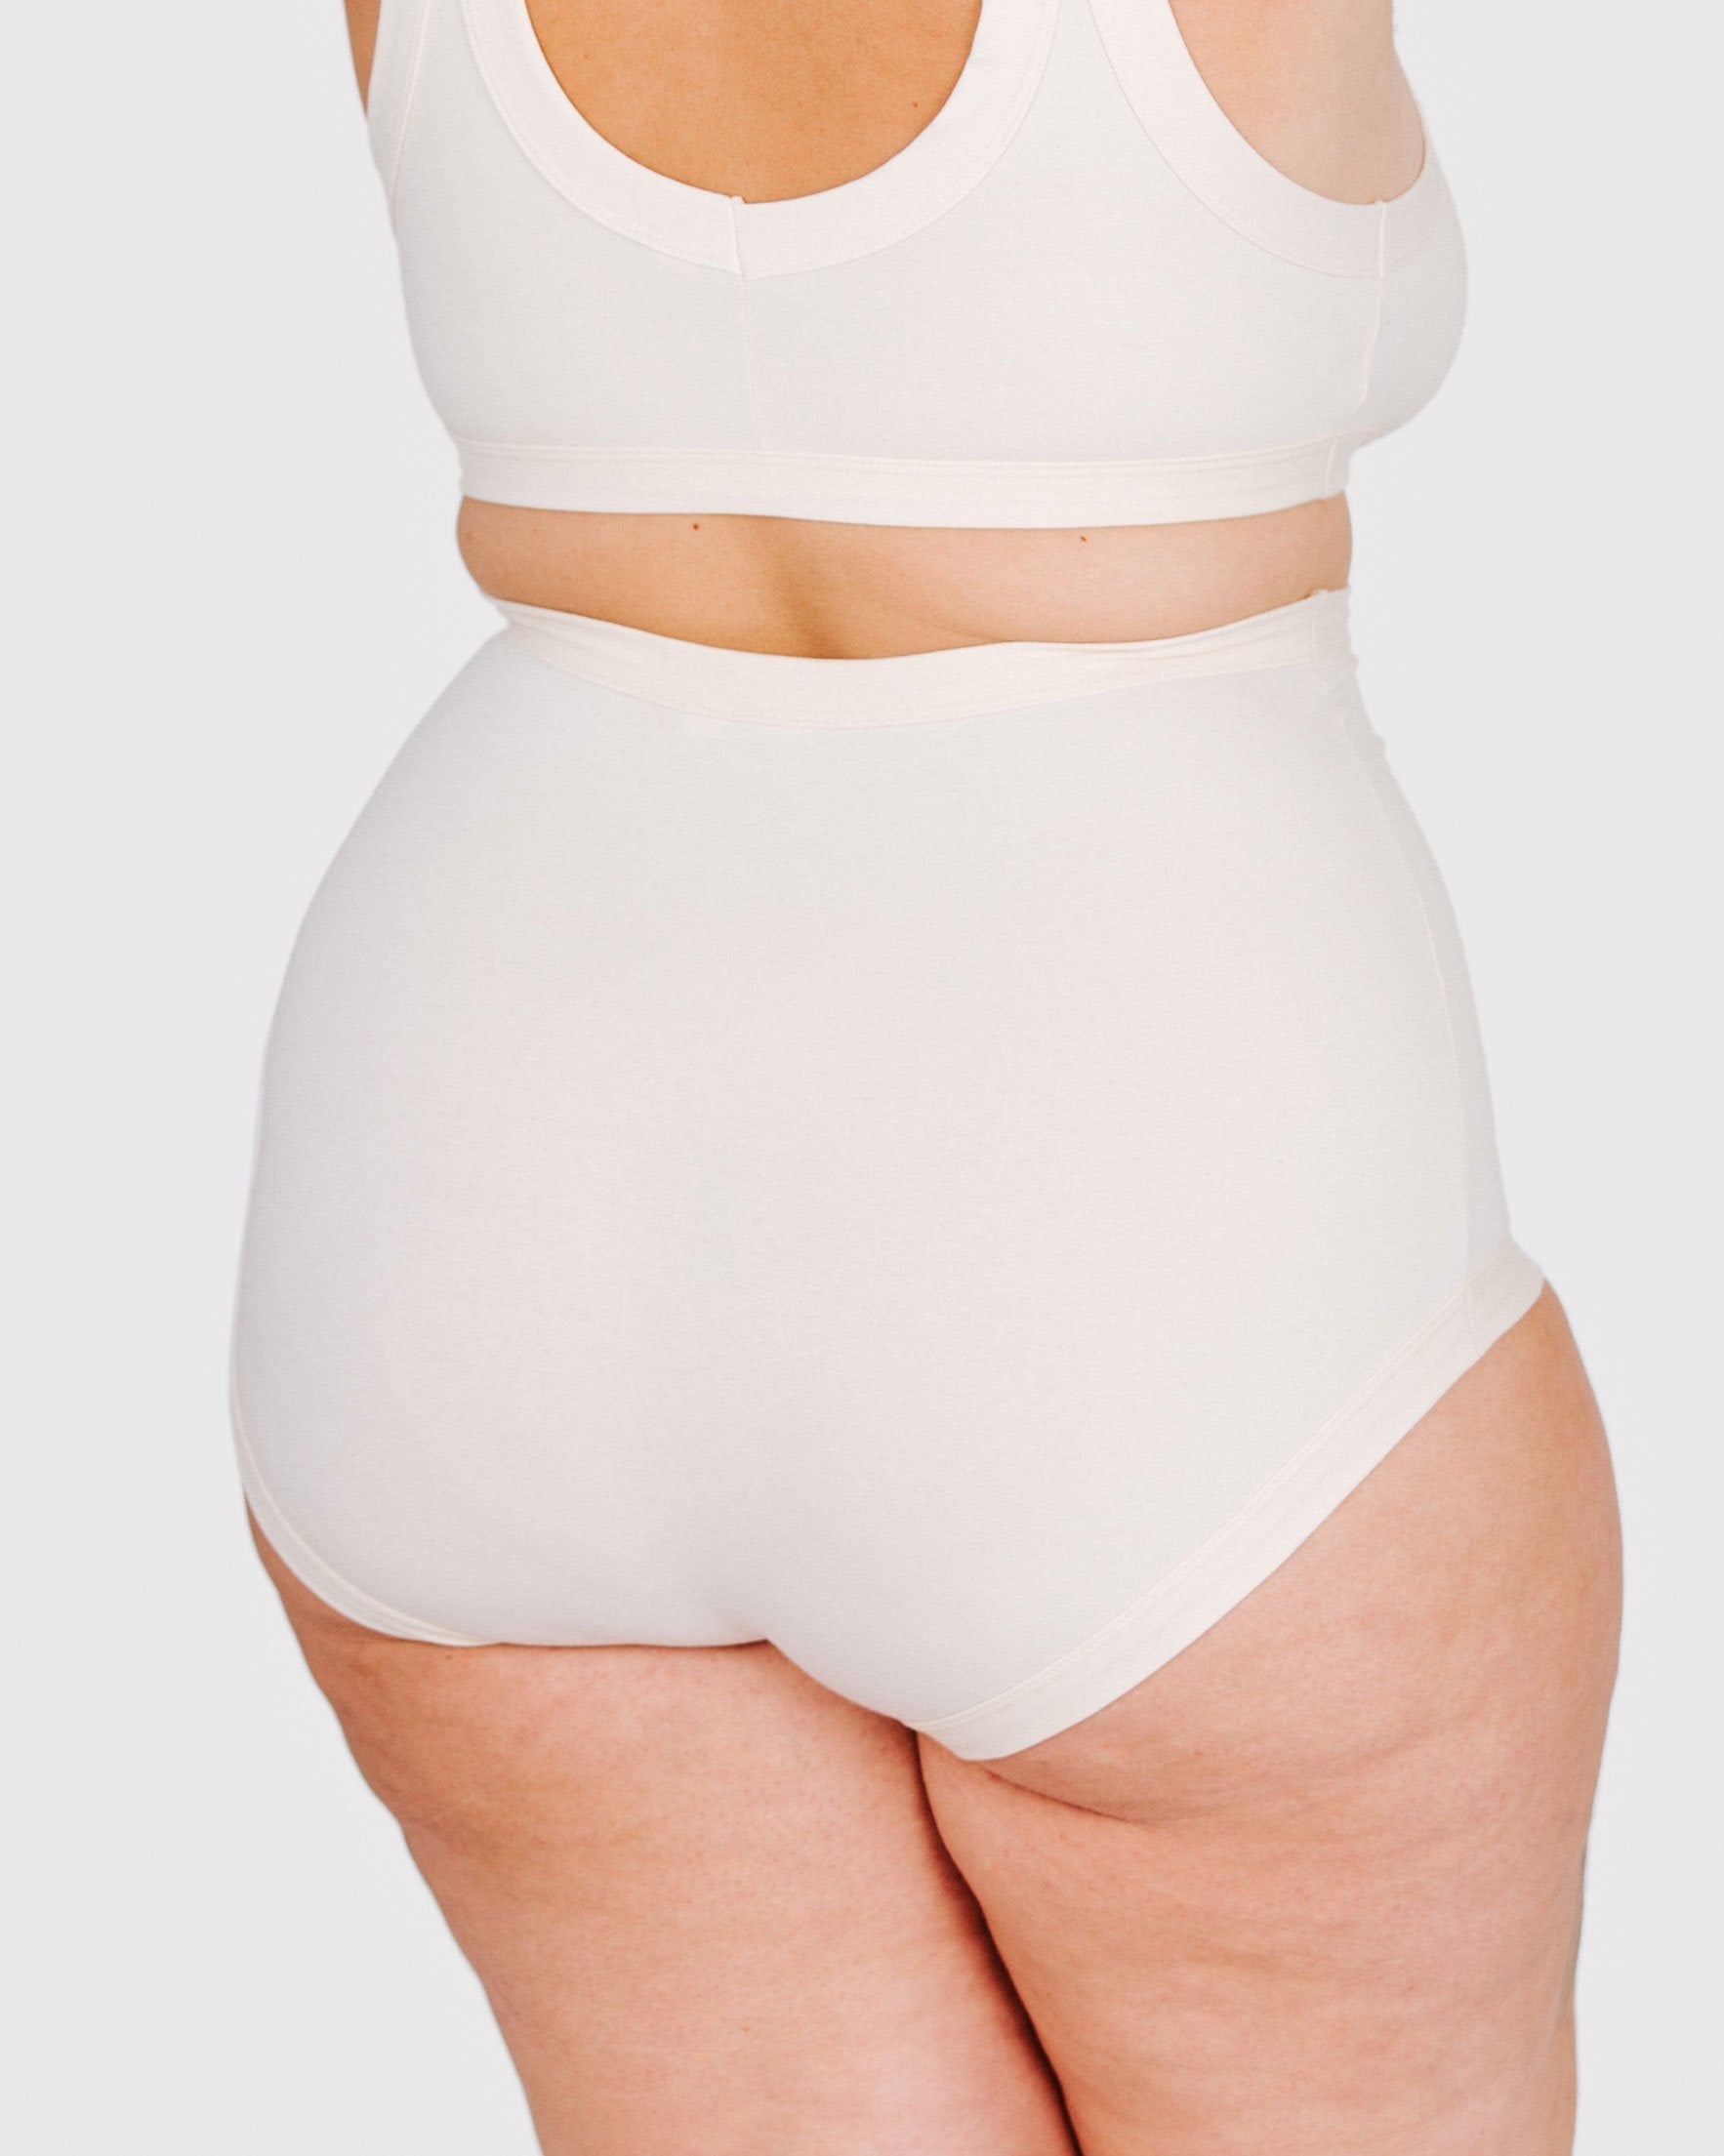 Fit photo from the back of Thunderpants organic cotton Sky Rise style underwear in off-white on, showing a wedgie-free bum, on a model.